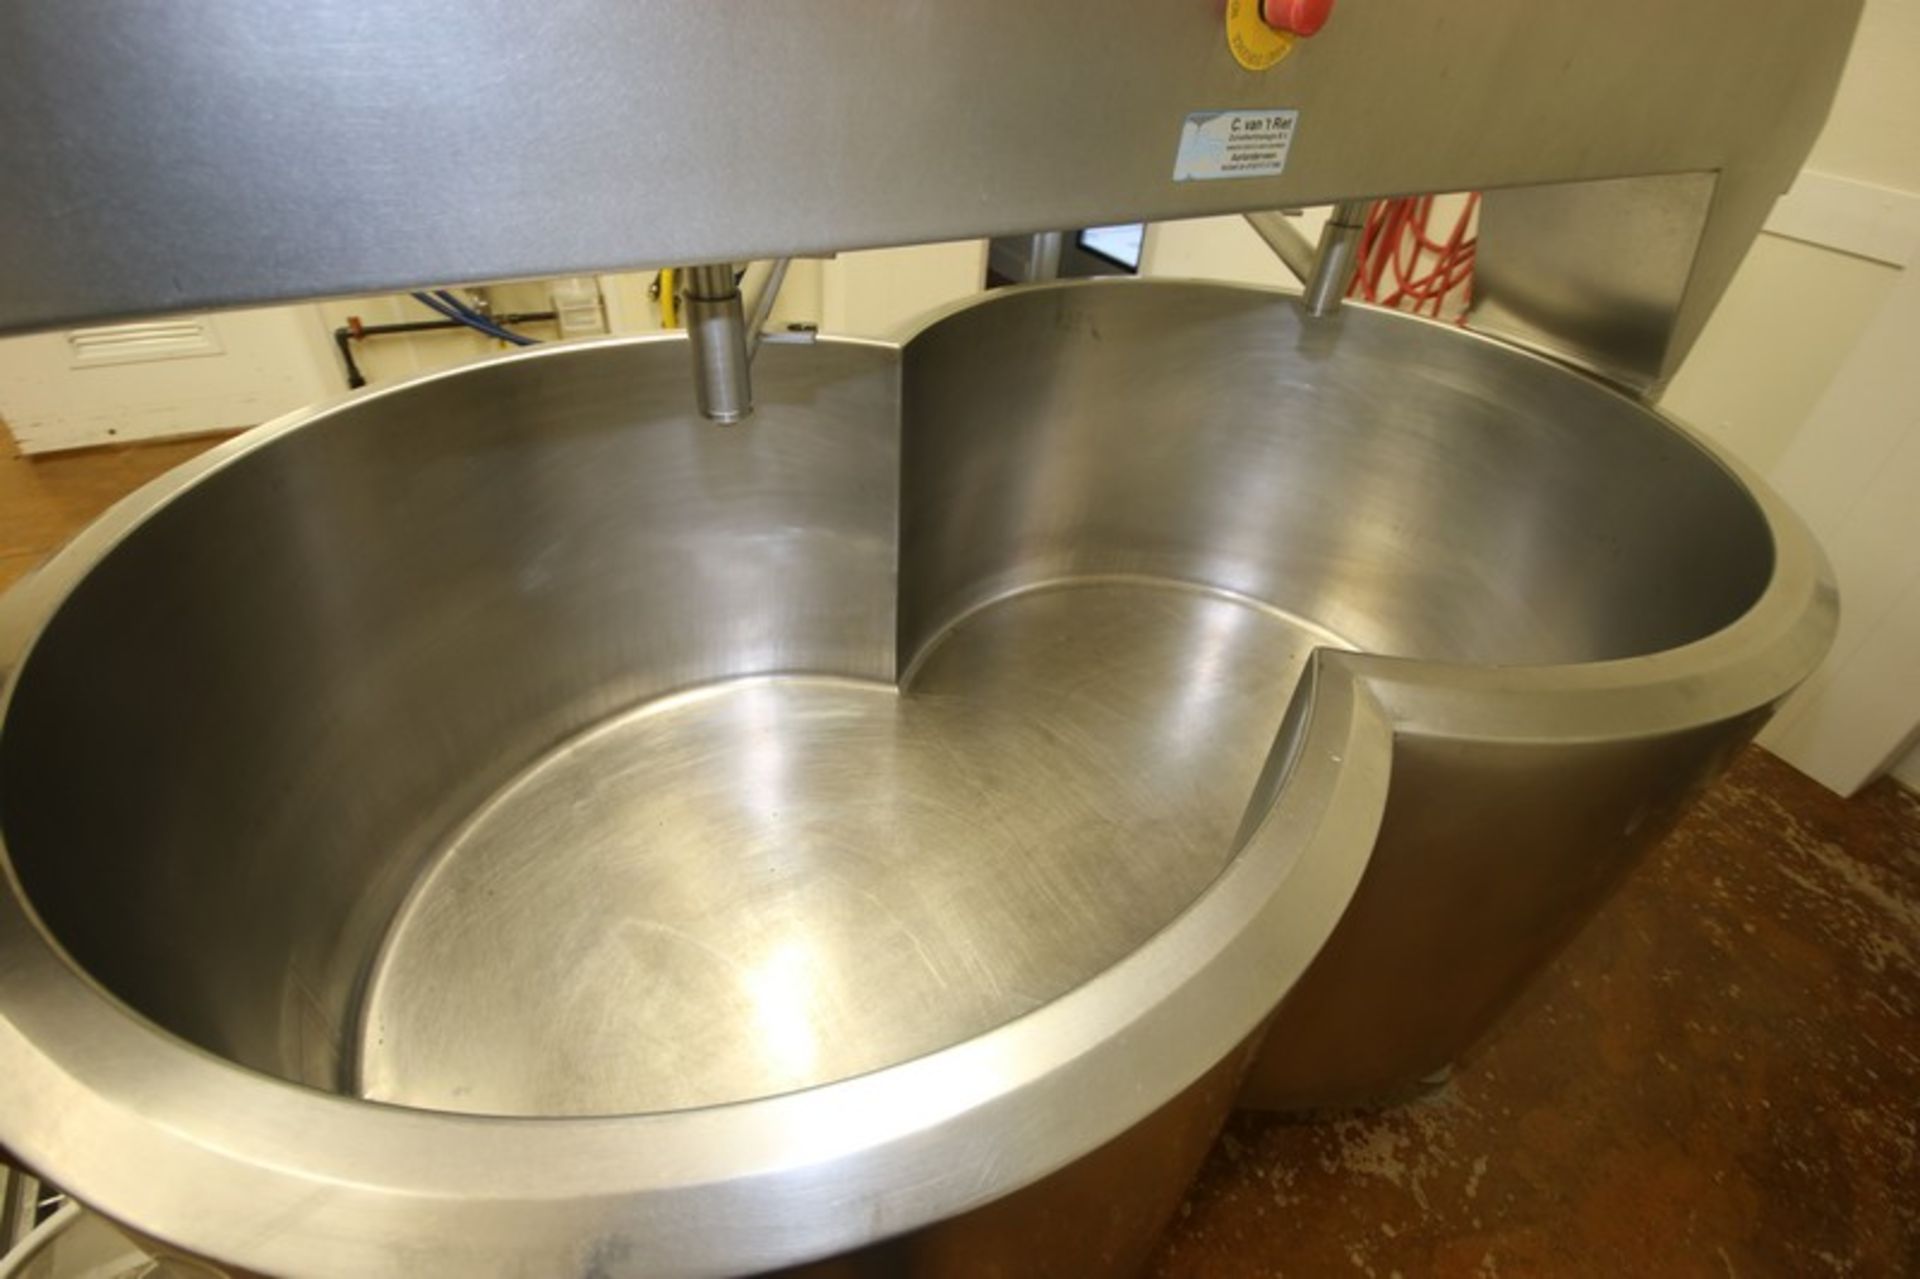 CVR 290 Gal. Double OO Cheesevat, S/N 0708019706, Includes Pump, Overall Dims.: Aprox. 8' L x 53" - Image 4 of 13